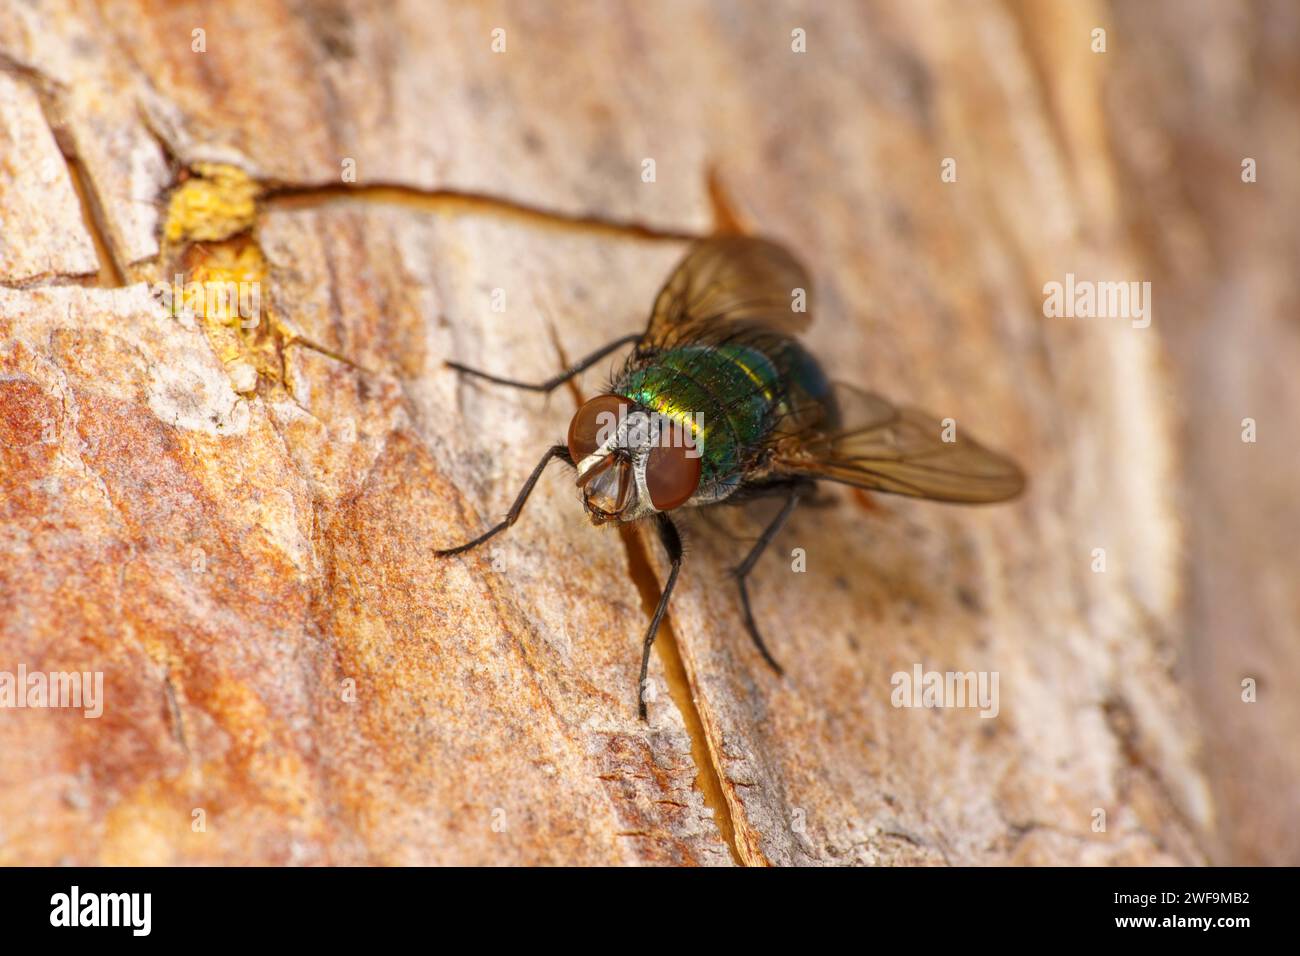 Lucilia sericata Common green bottle fly Sheep blow fly Family Calliphoridae Genus Lucilia fly wild nature insect wallpaper Stock Photo